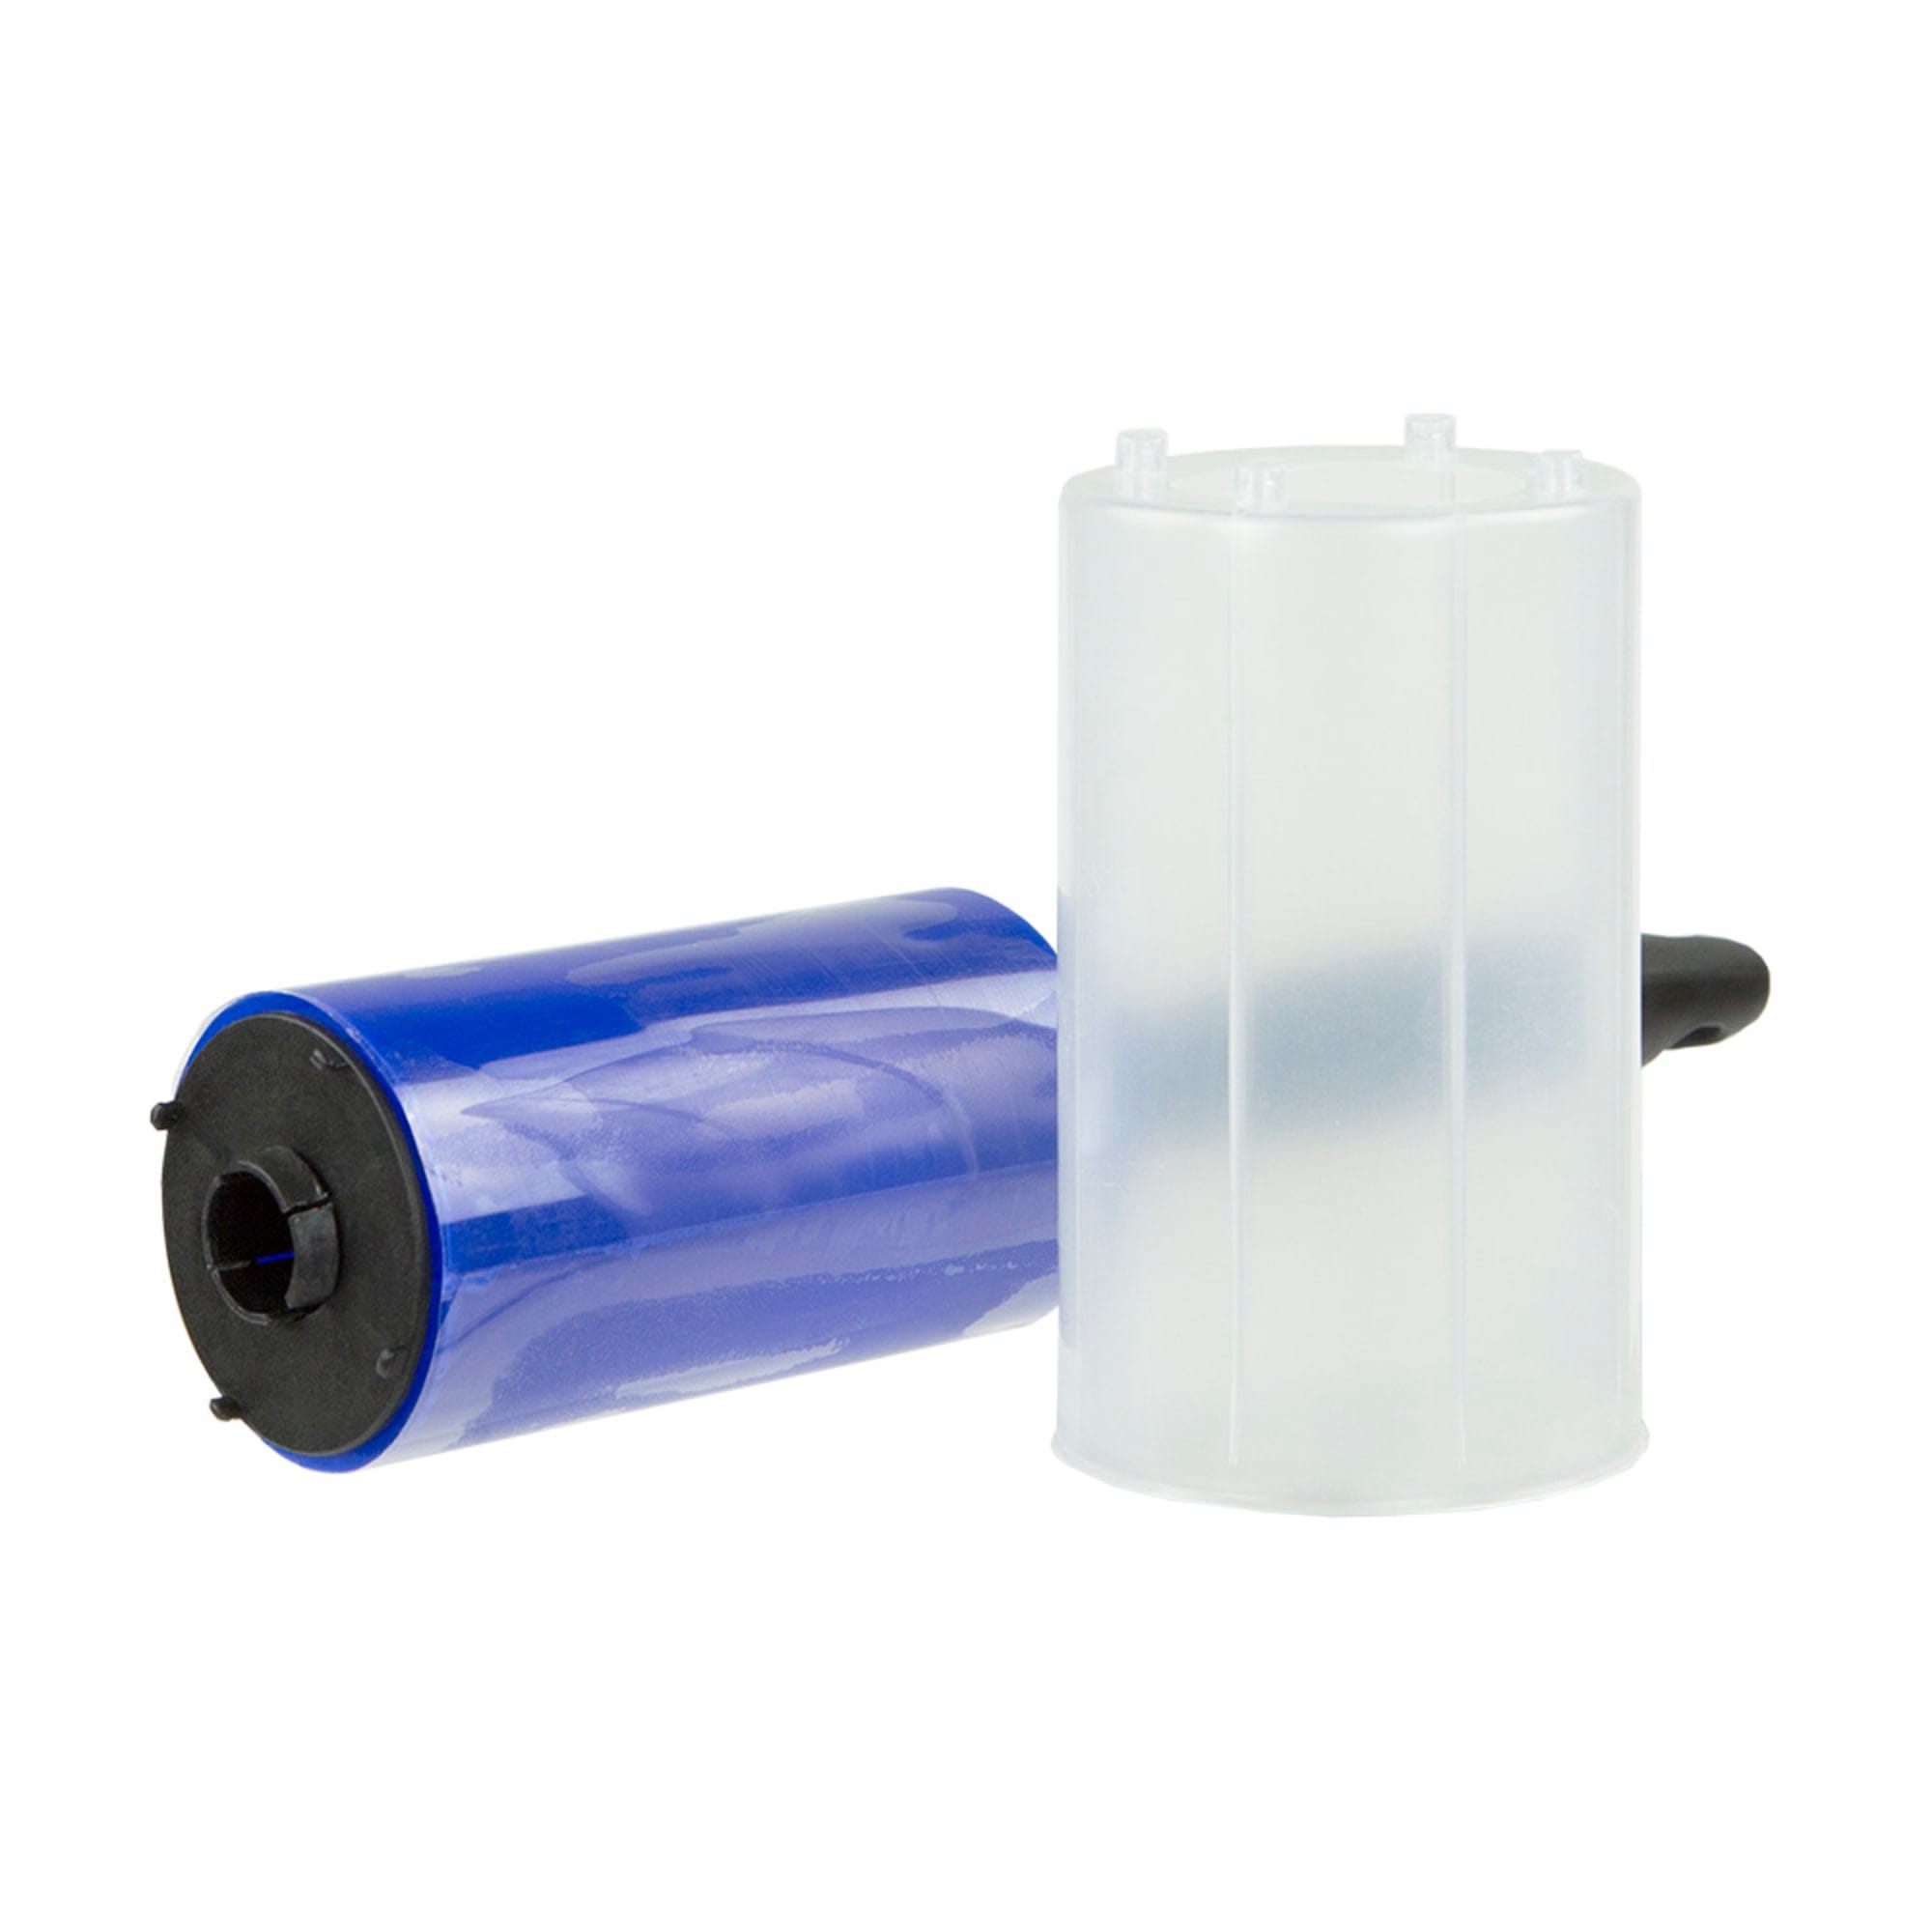 Home Basics Washable Lint Roller, Blue $2.00 EACH, CASE PACK OF 24